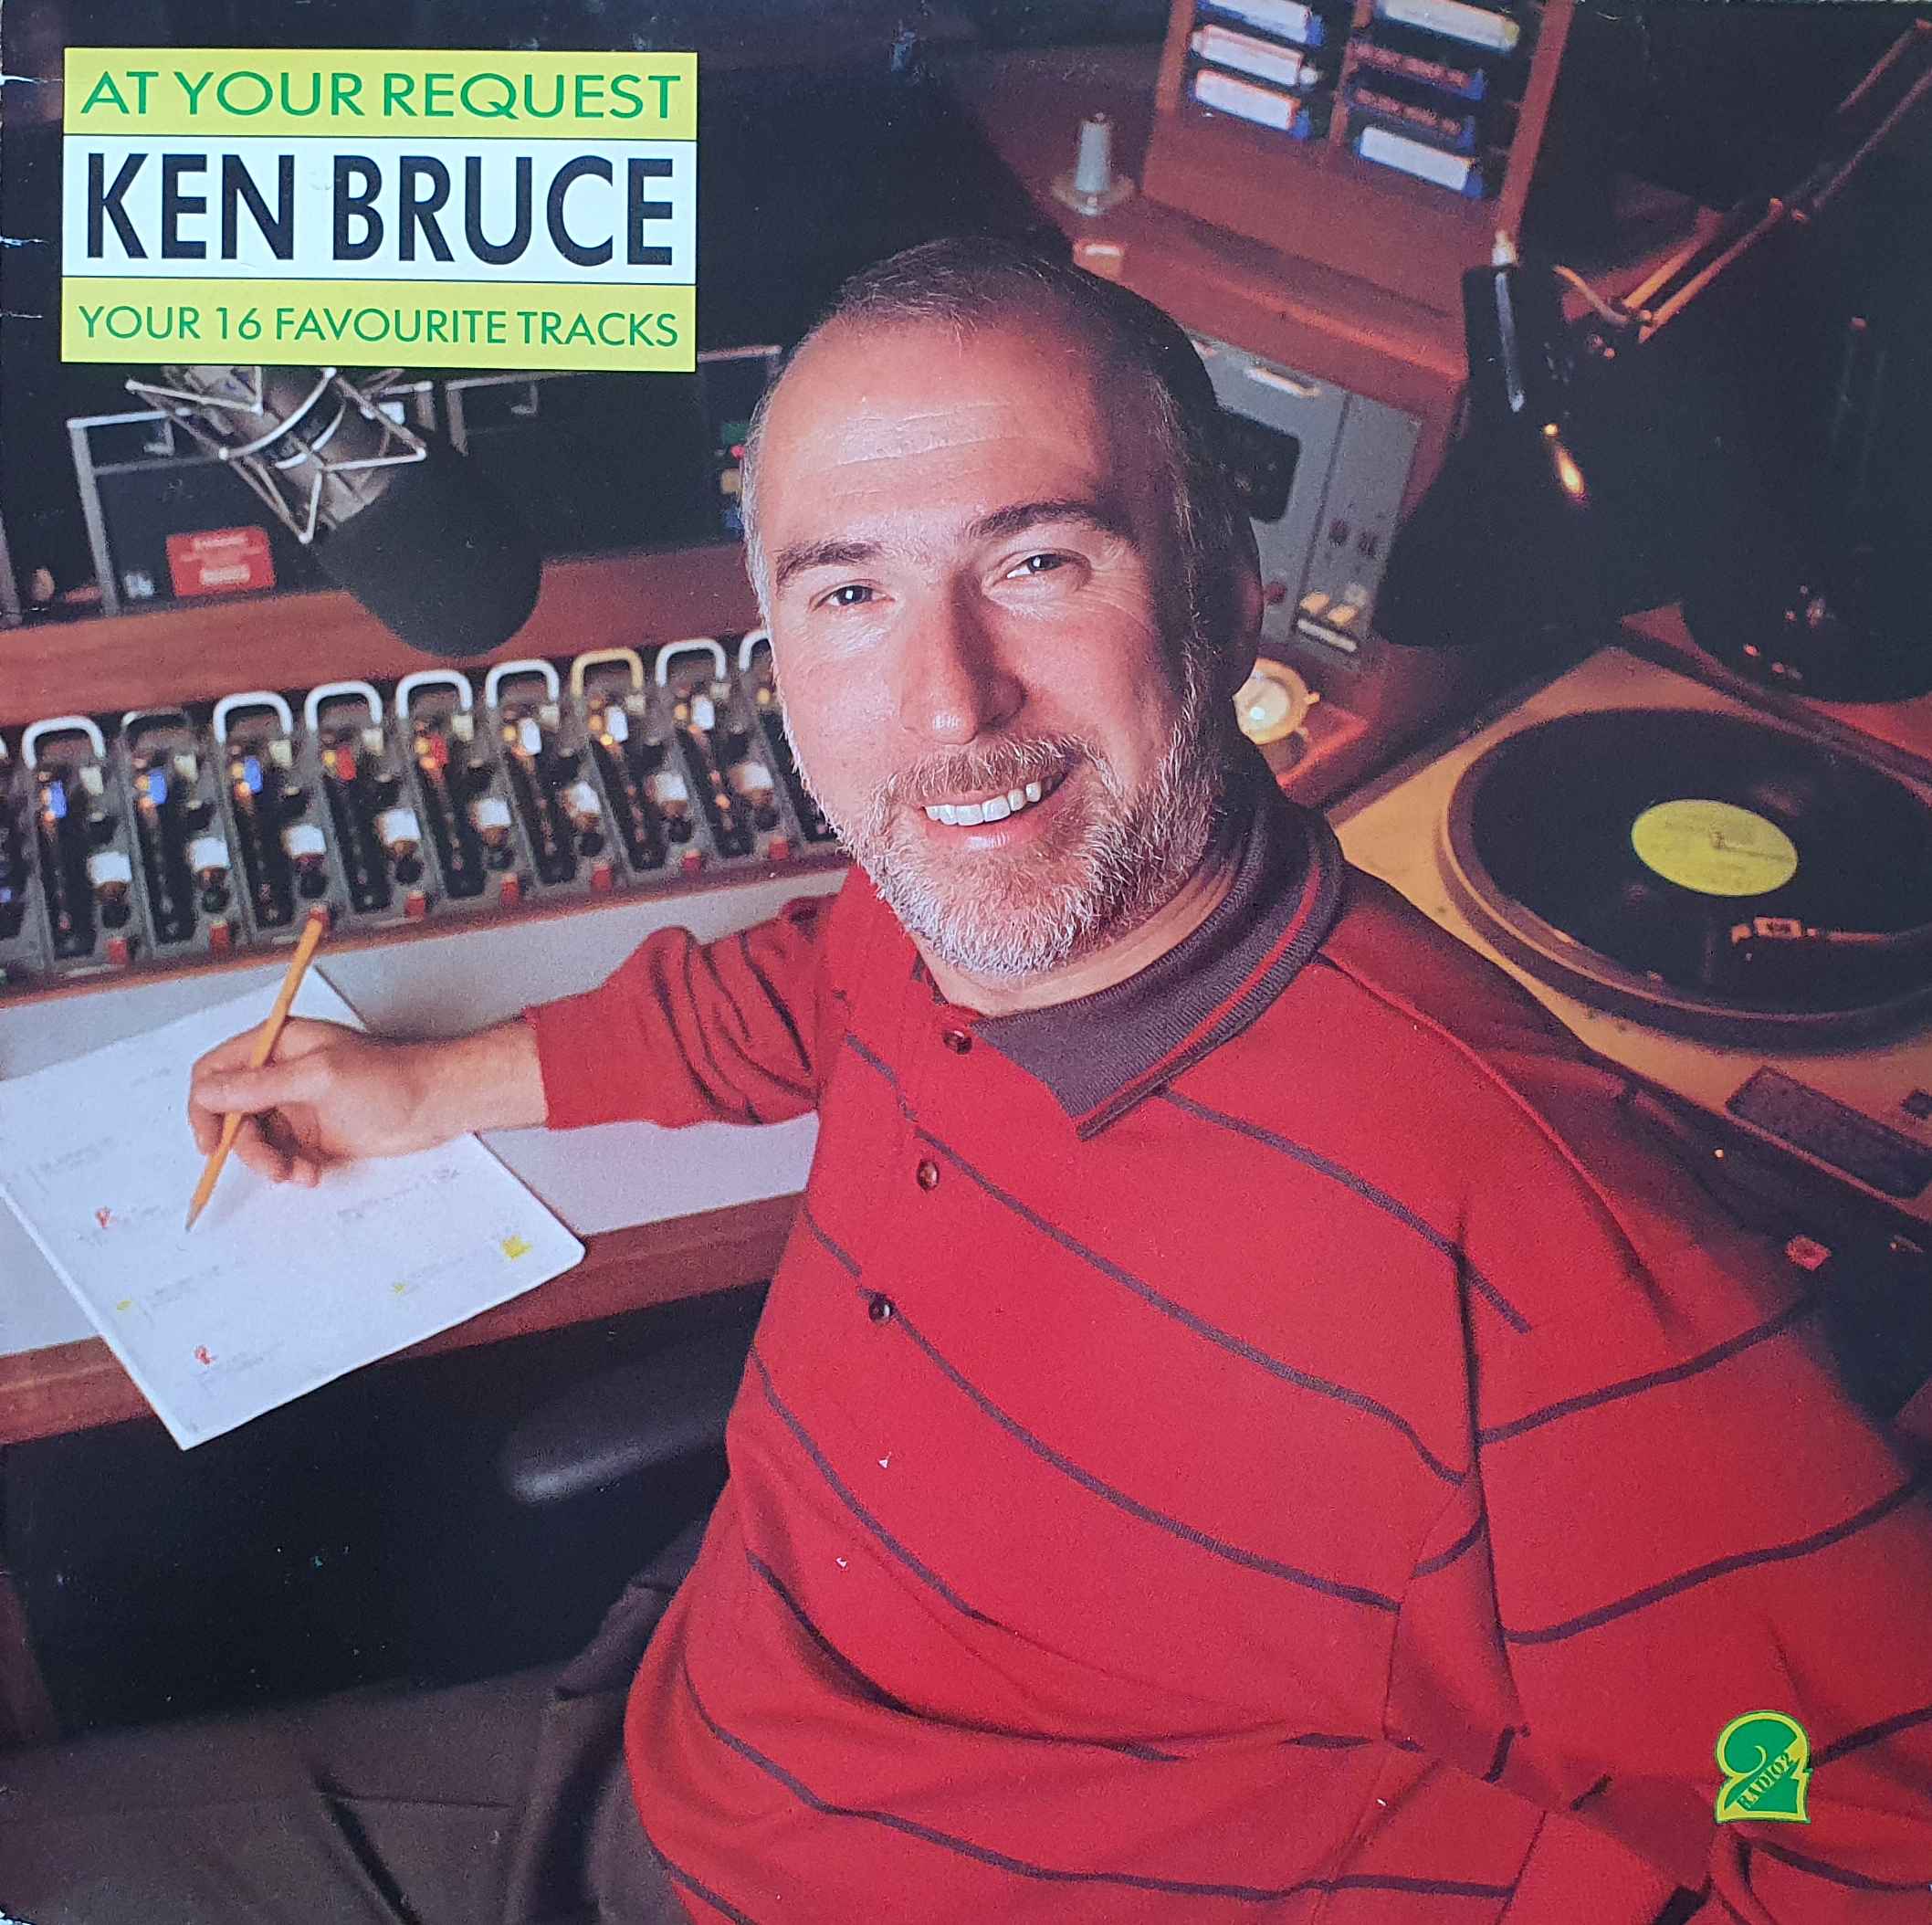 Picture of REN 710 At your request - Ken Bruce by artist Various from the BBC albums - Records and Tapes library